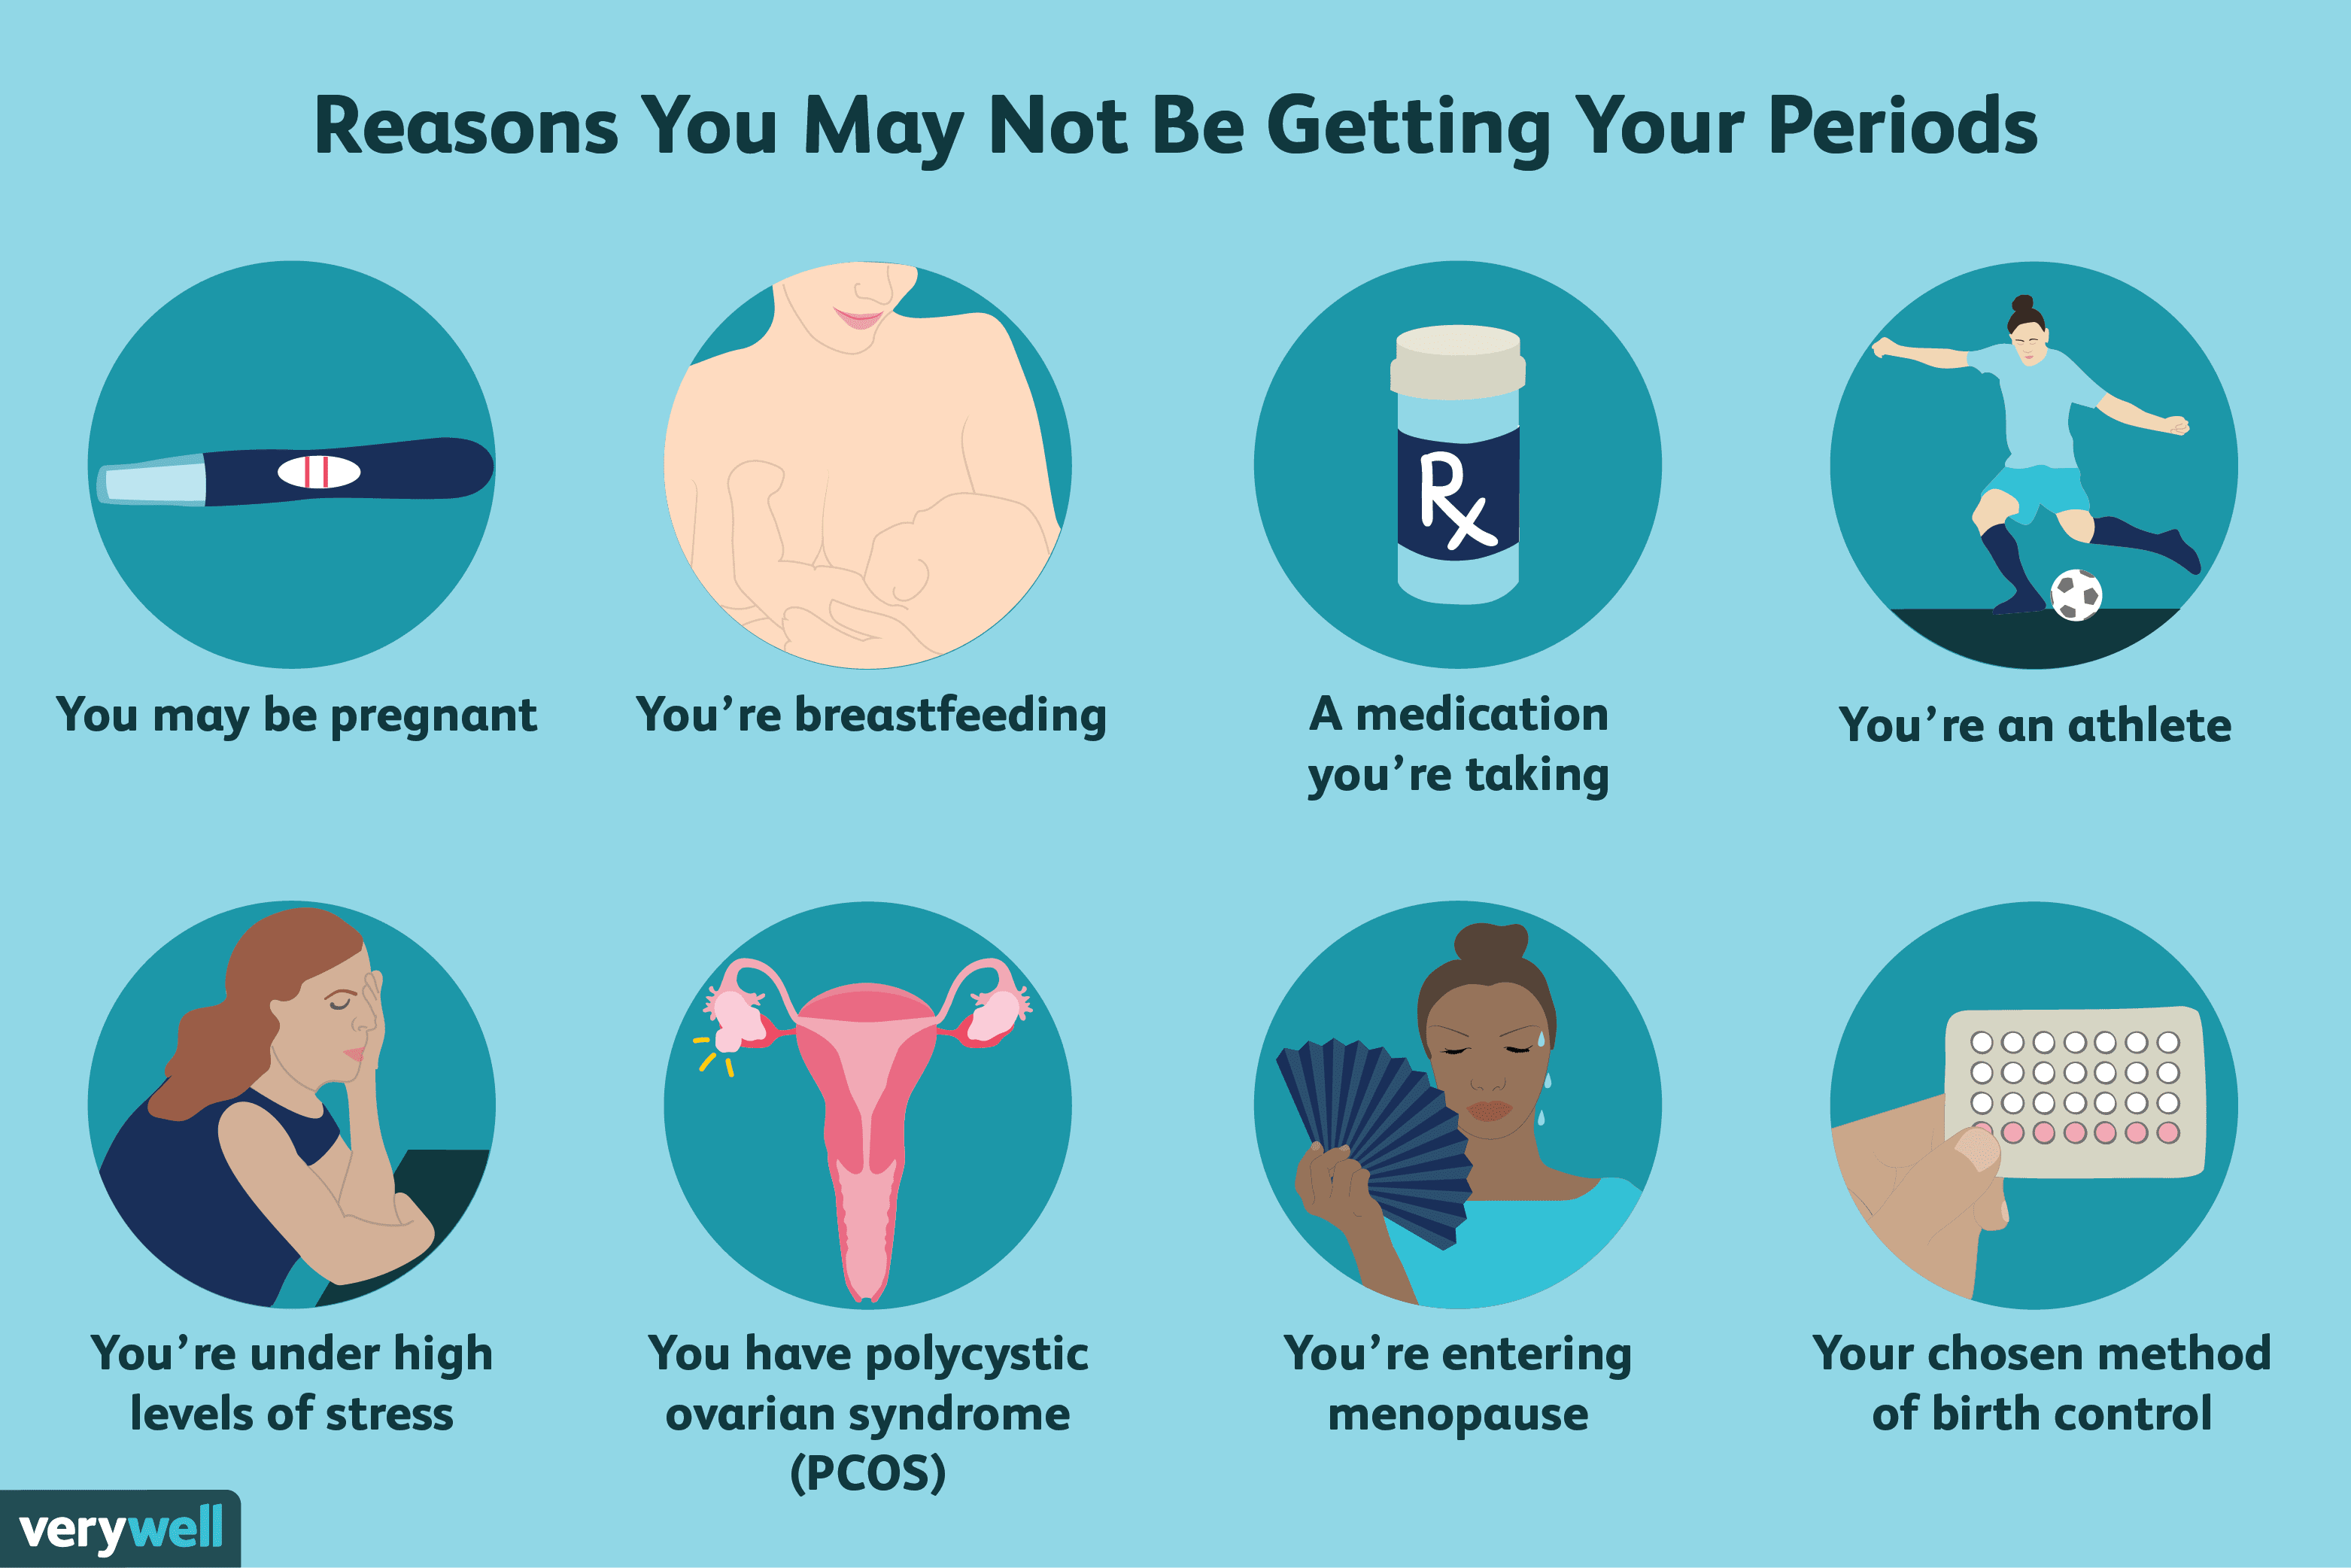 Can You Get Pregnant Without Having a Period?